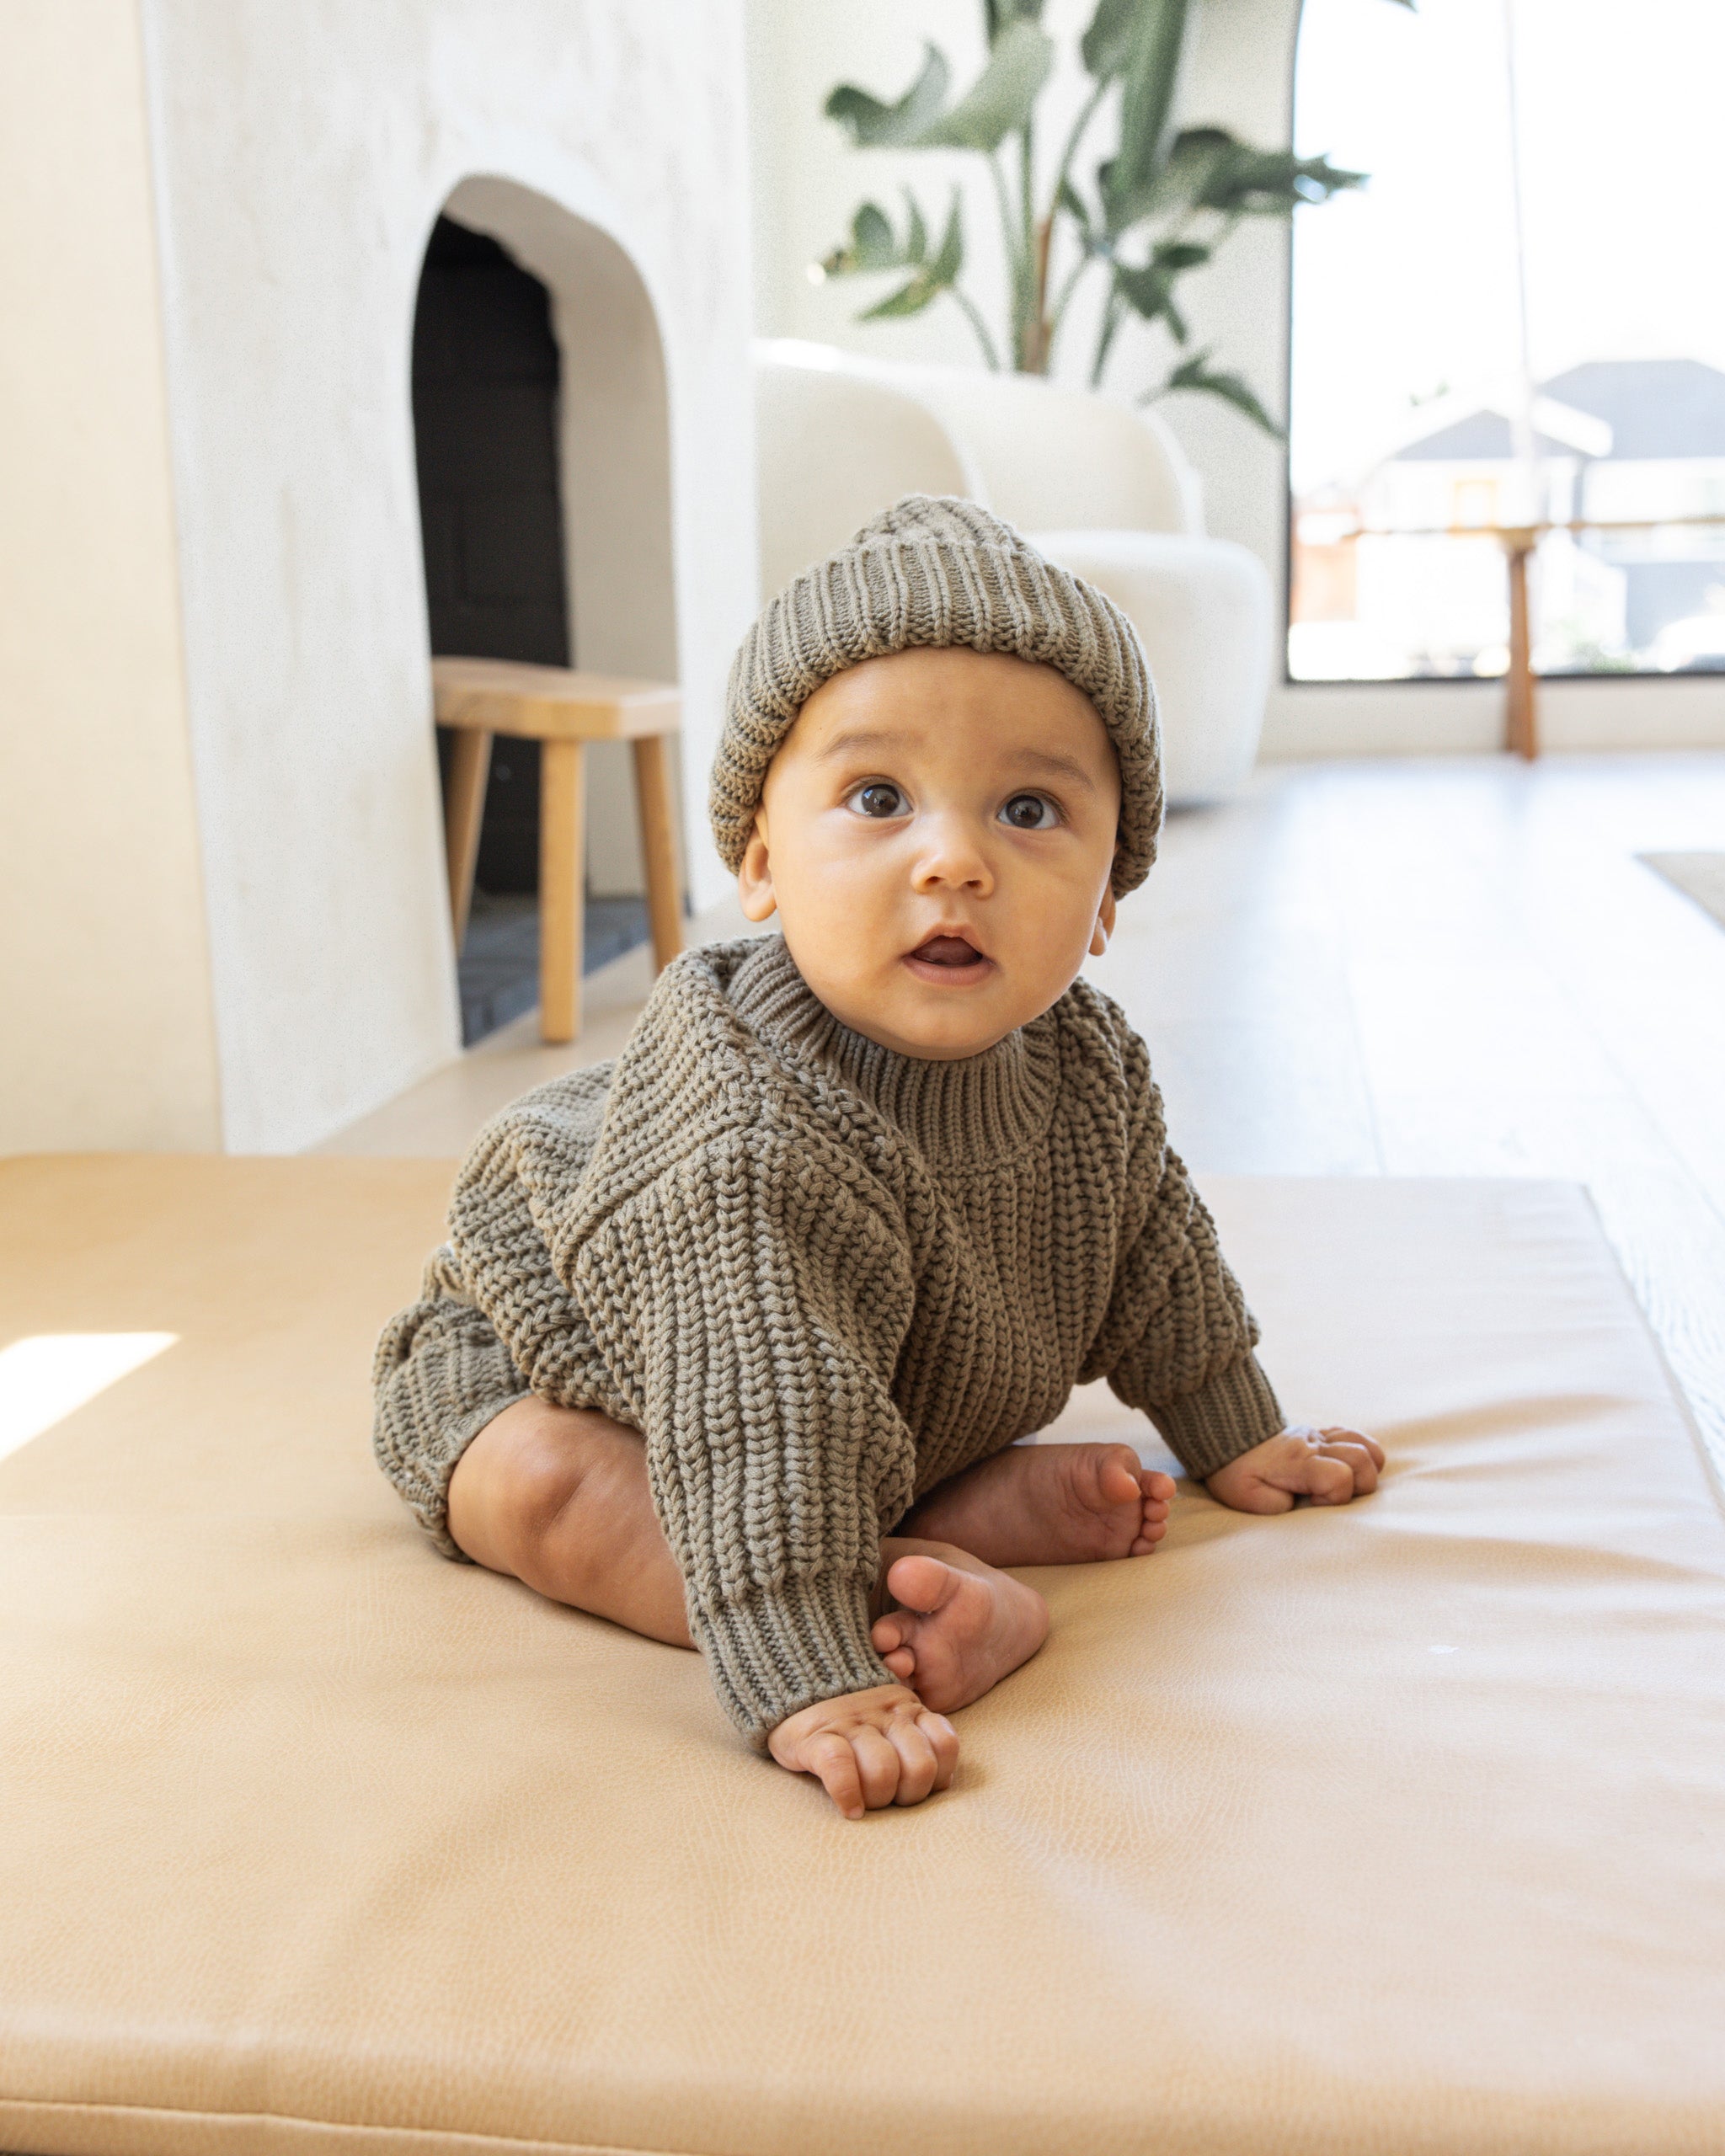 Knit Bloomer  Heathered Check – Butterbugboutique